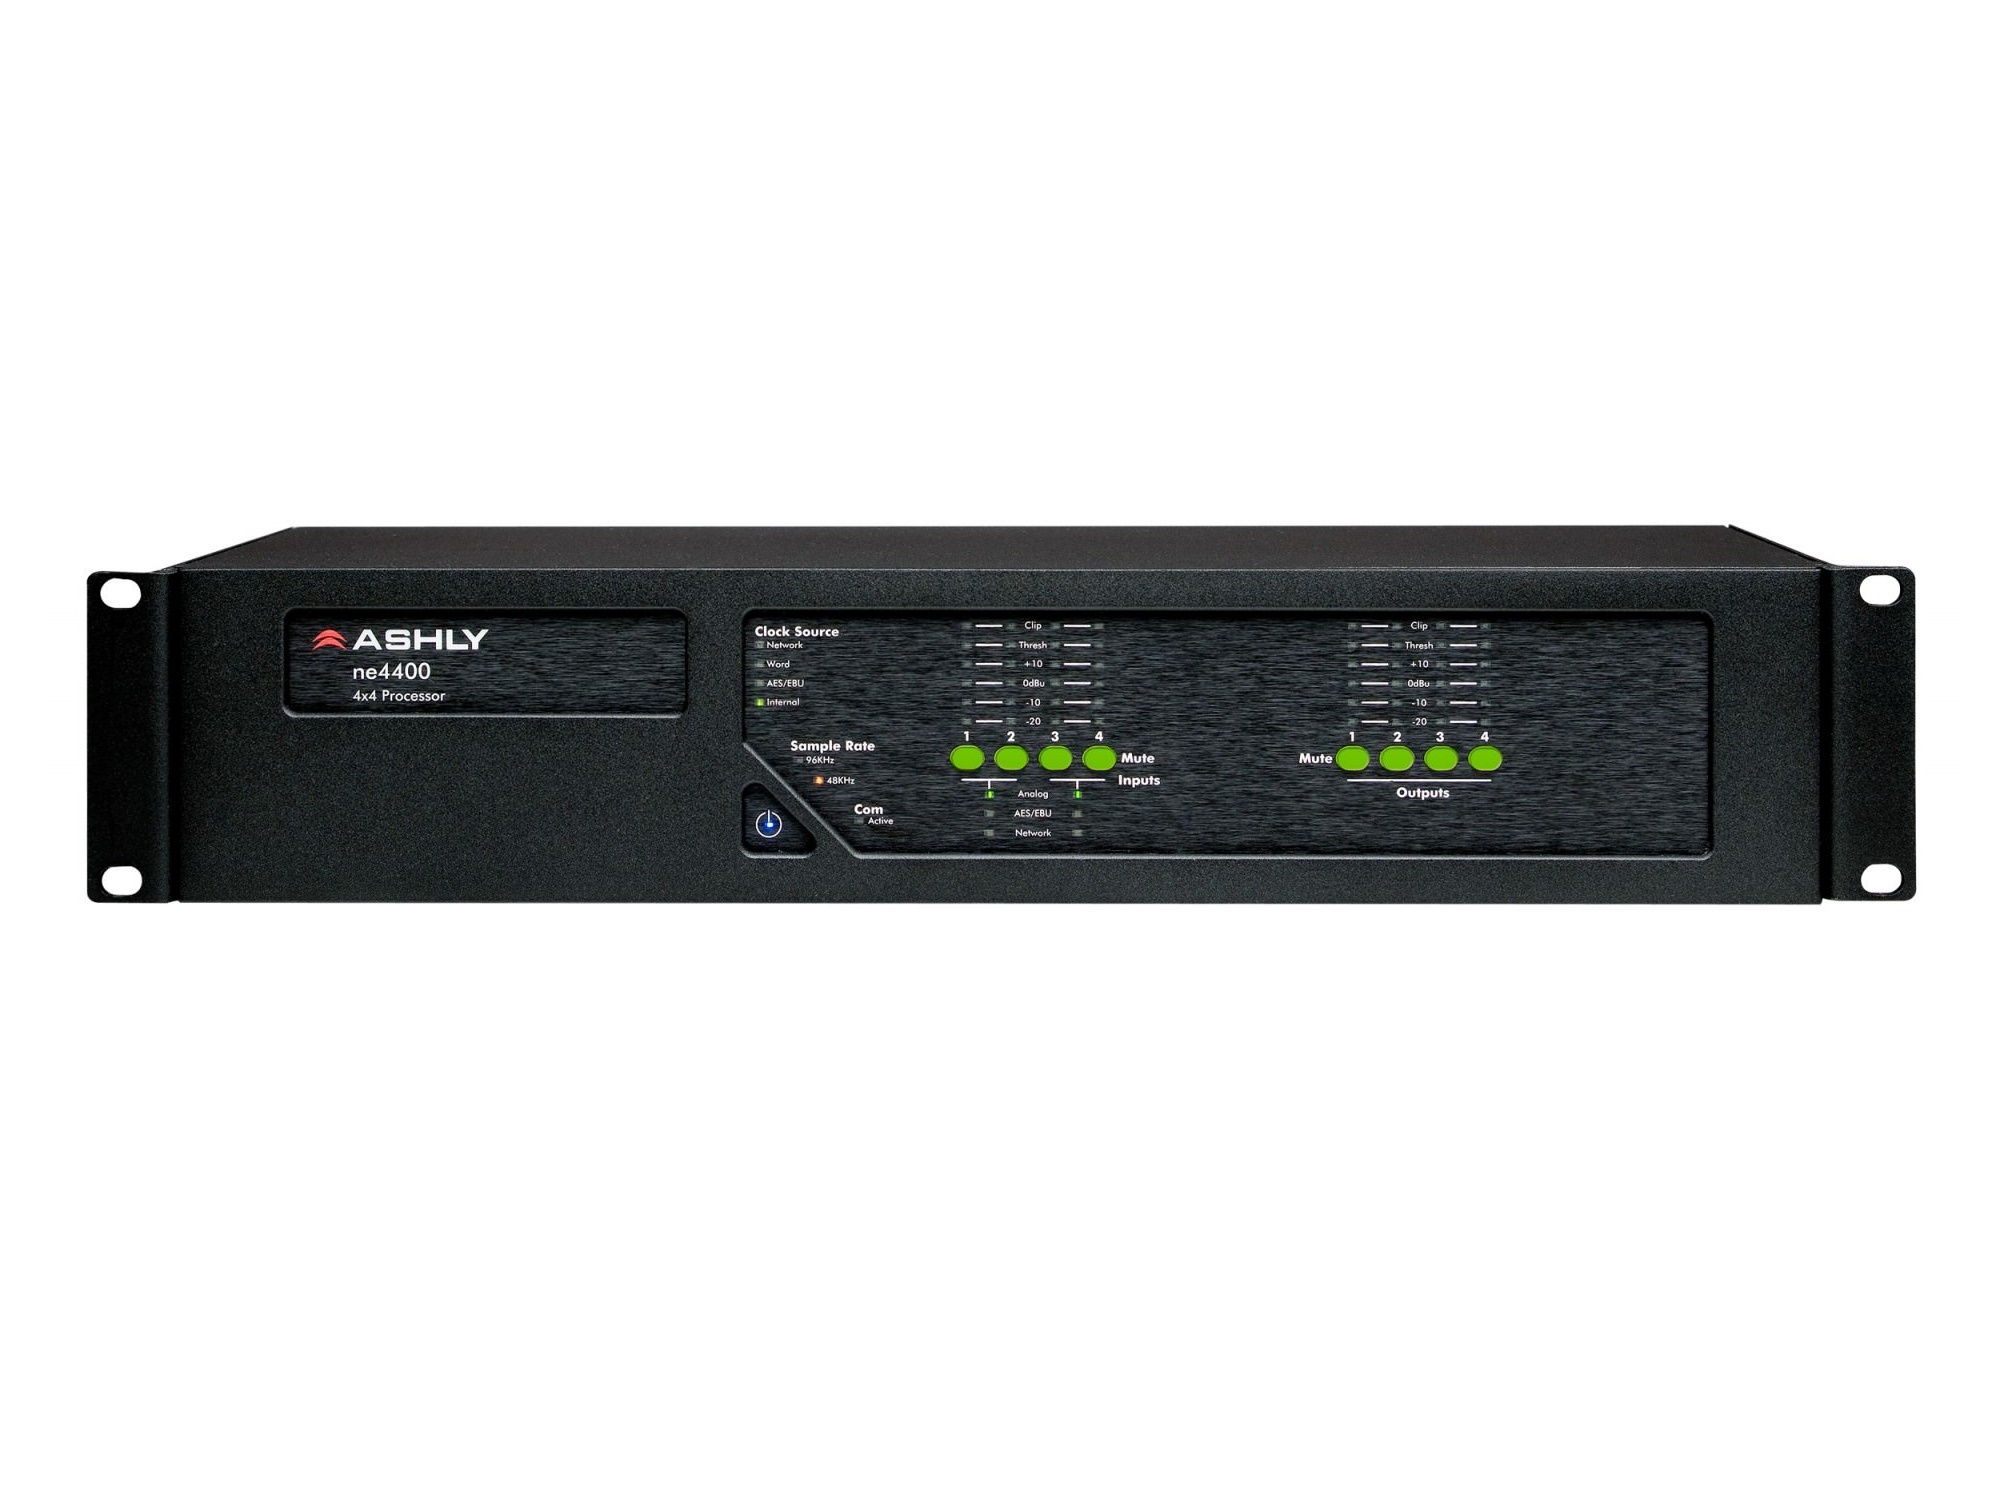 ne4400ad ne4400 Network Protea System Processor plus 4-Chan AES3 Inputs and Dante Network Card by Ashly